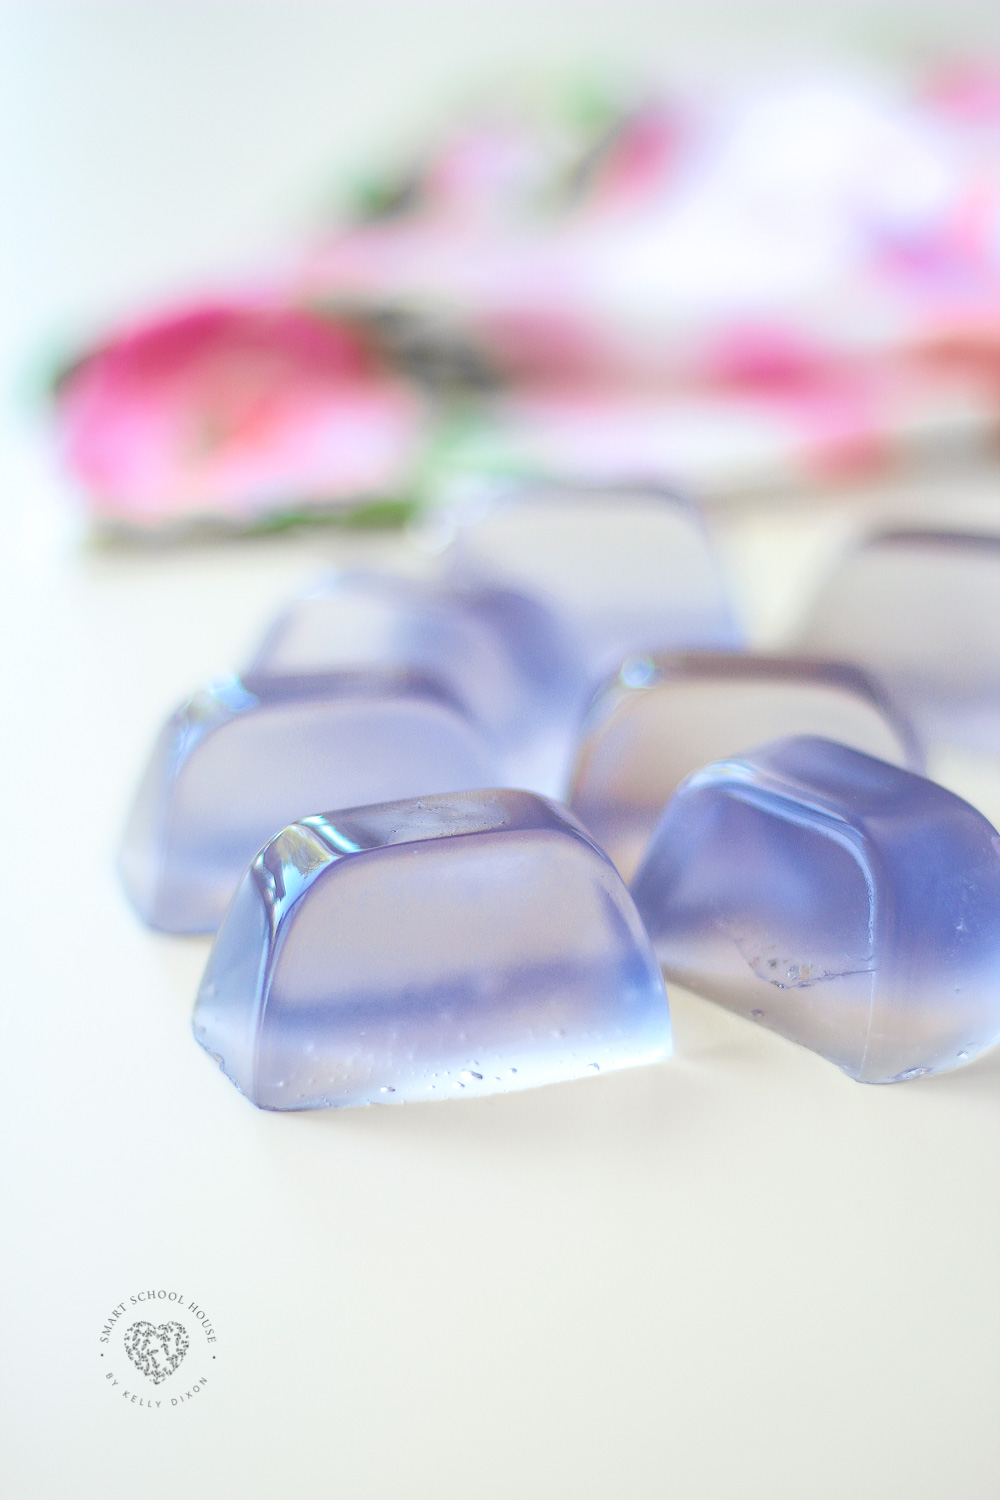 SOAP JELLIES! Wiggly, jiggly, foaming soap cubes that smell SO GOOD! Can be used in the bath, shower, or as hand soap. These are fun to make and even fun to use! #SoapJellies #lavender #BathJellies